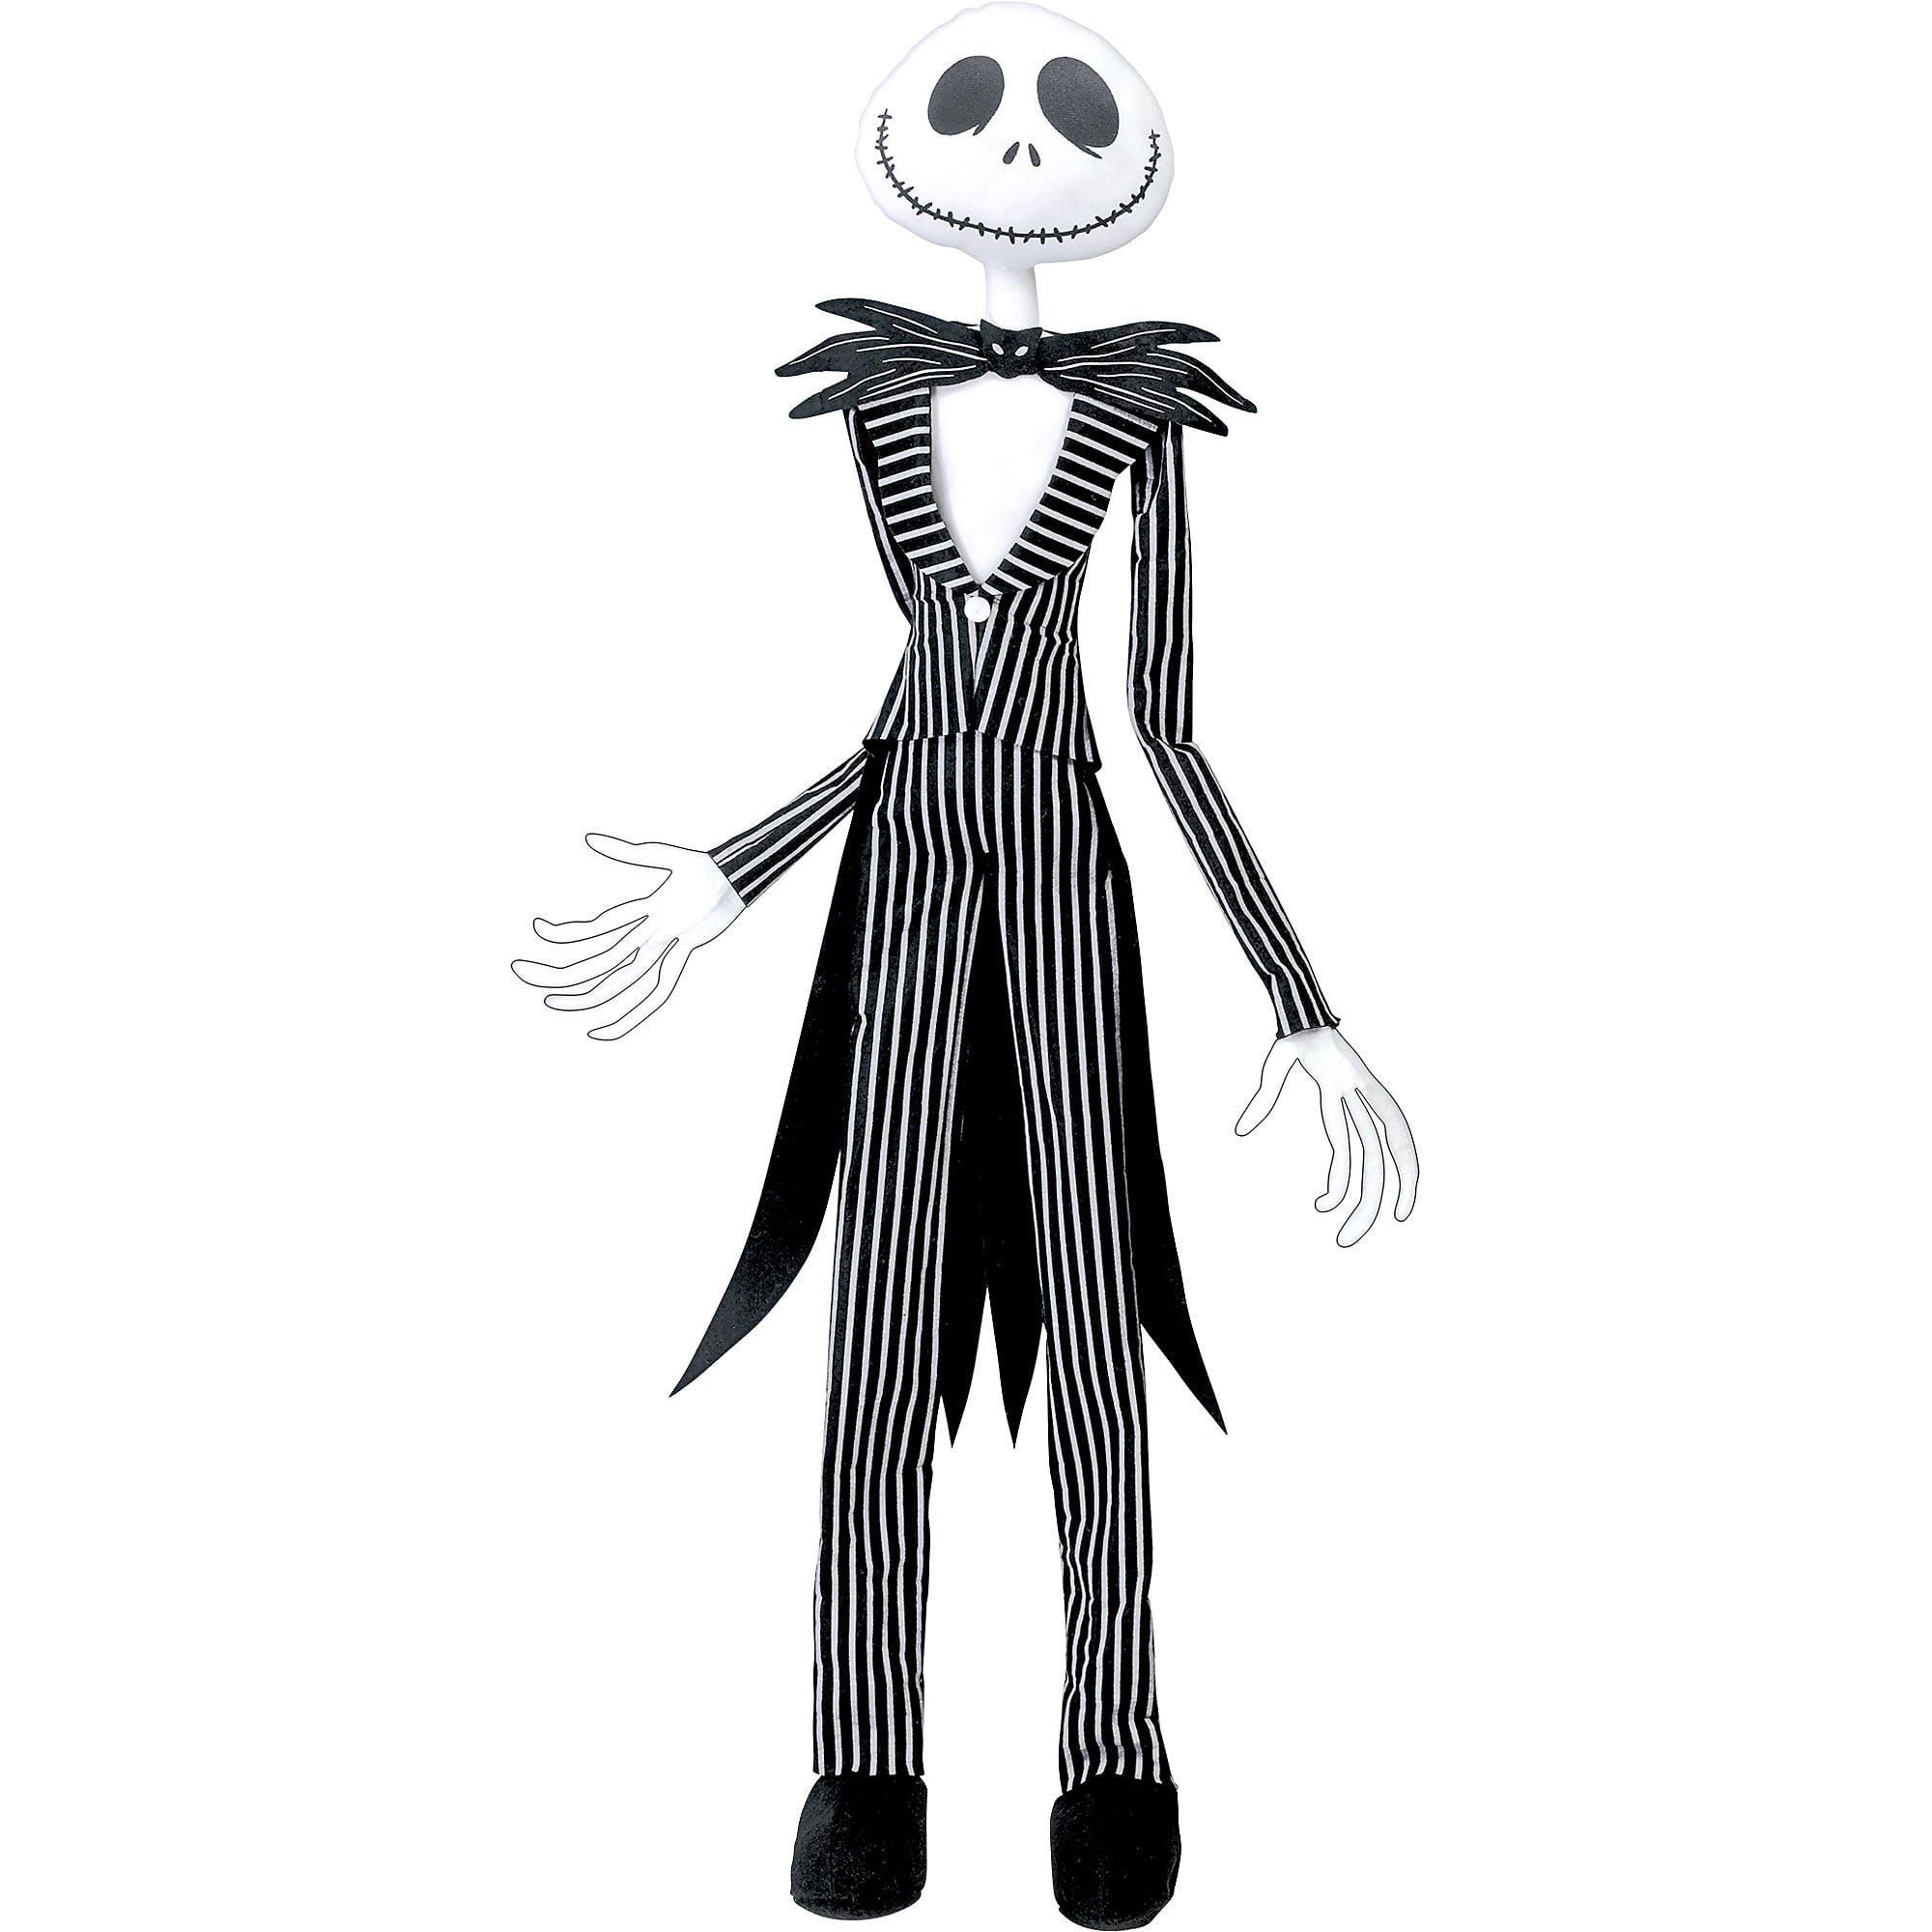 Details about  / Jack Skellington Nightmare Before Christmas Model Action Figure NEW